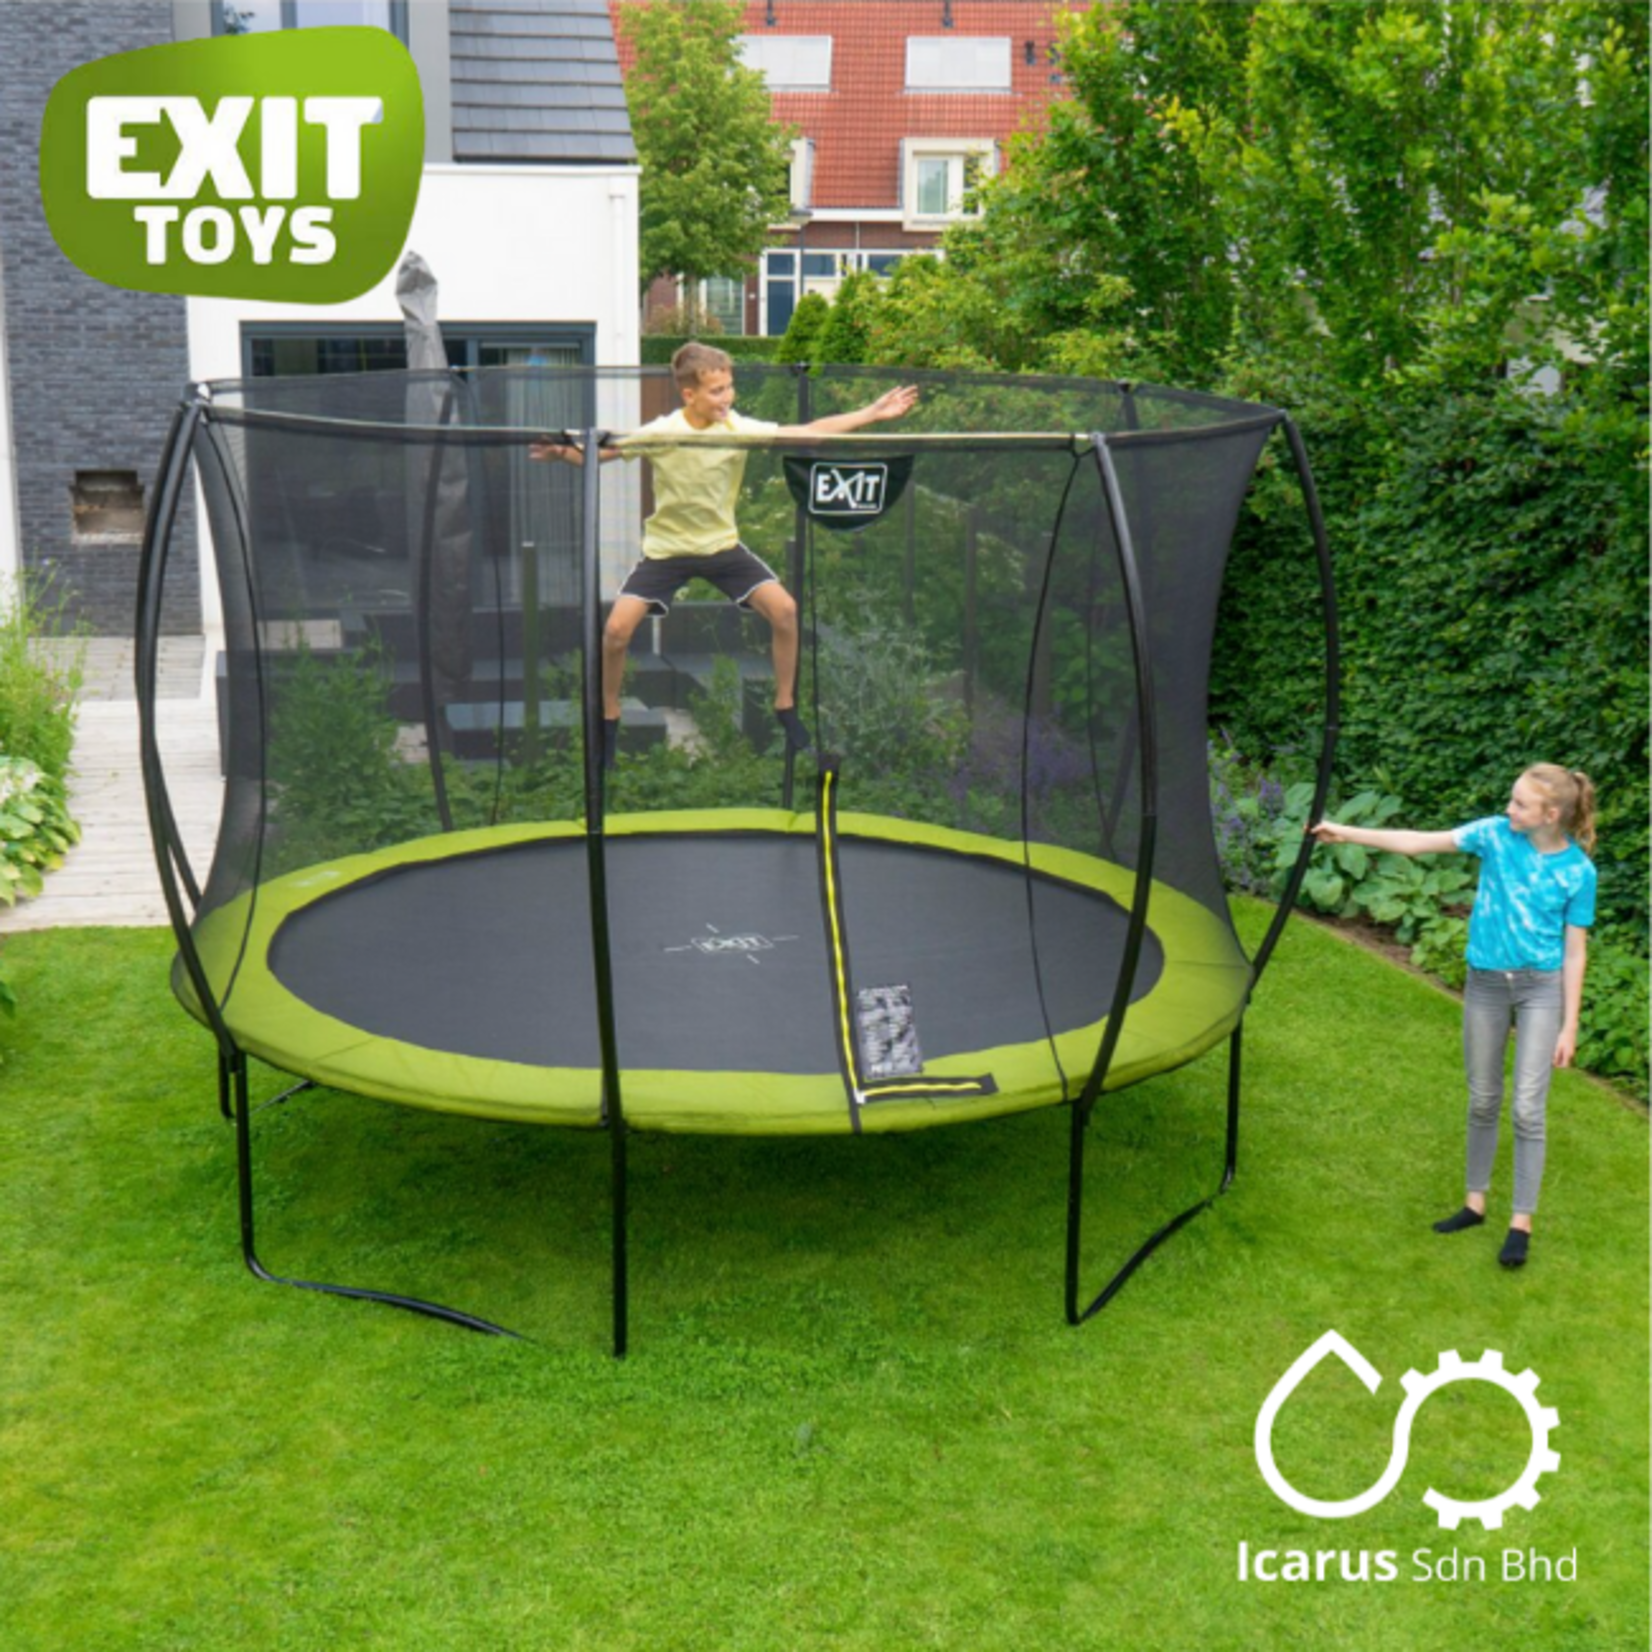 EXIT Toys Silhouette Trampoline ø 305 cm (10ft), Color Lime Green